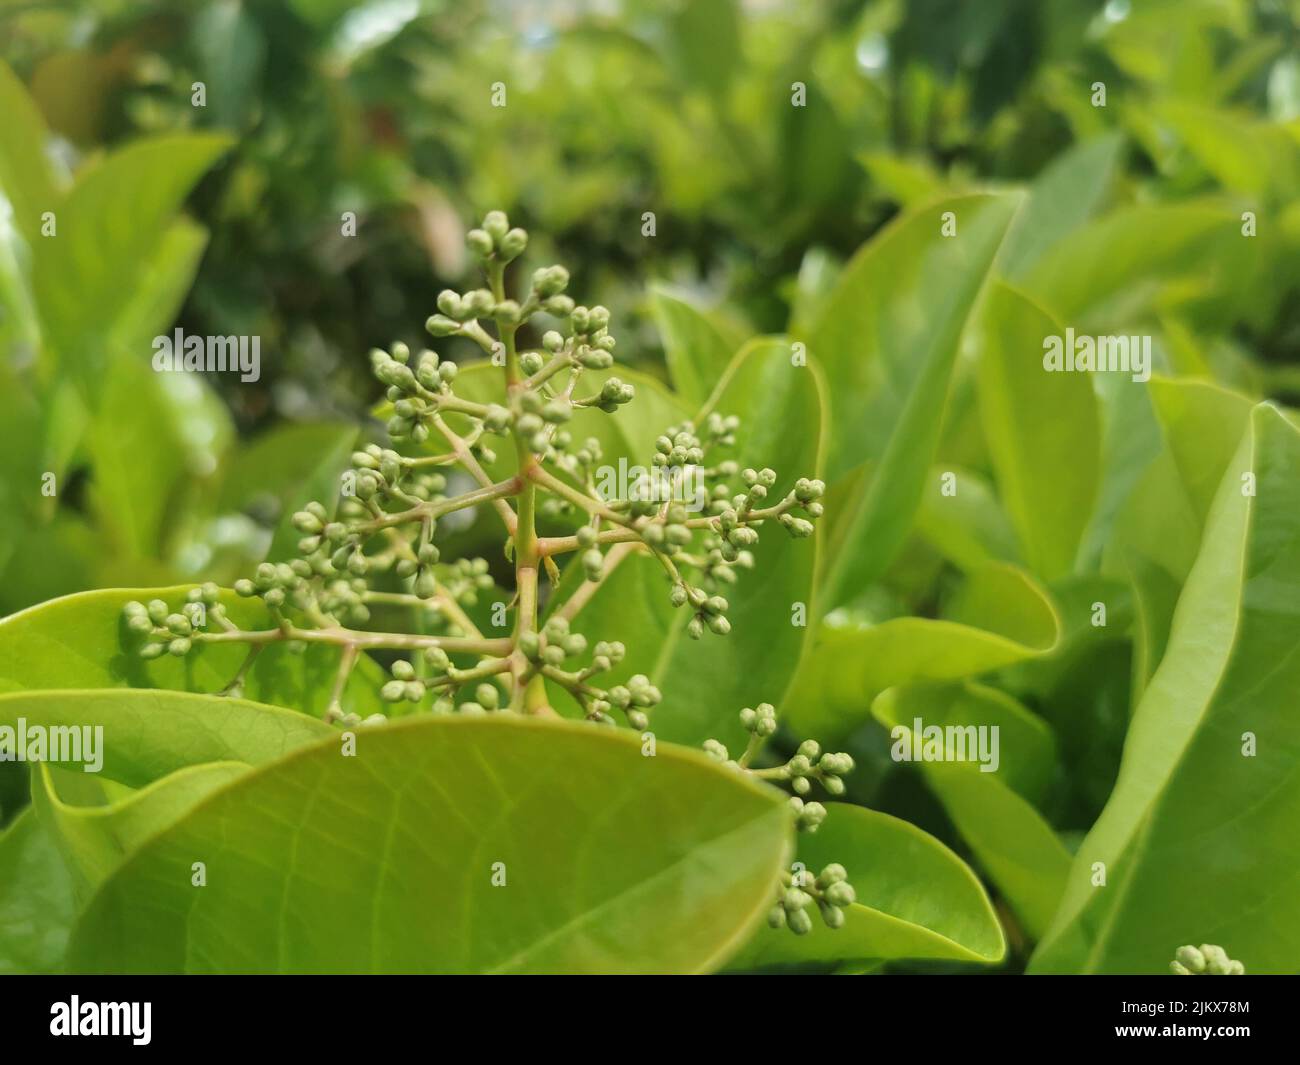 A closeup of Fragrant viburnum plant growing among green leaves Stock Photo